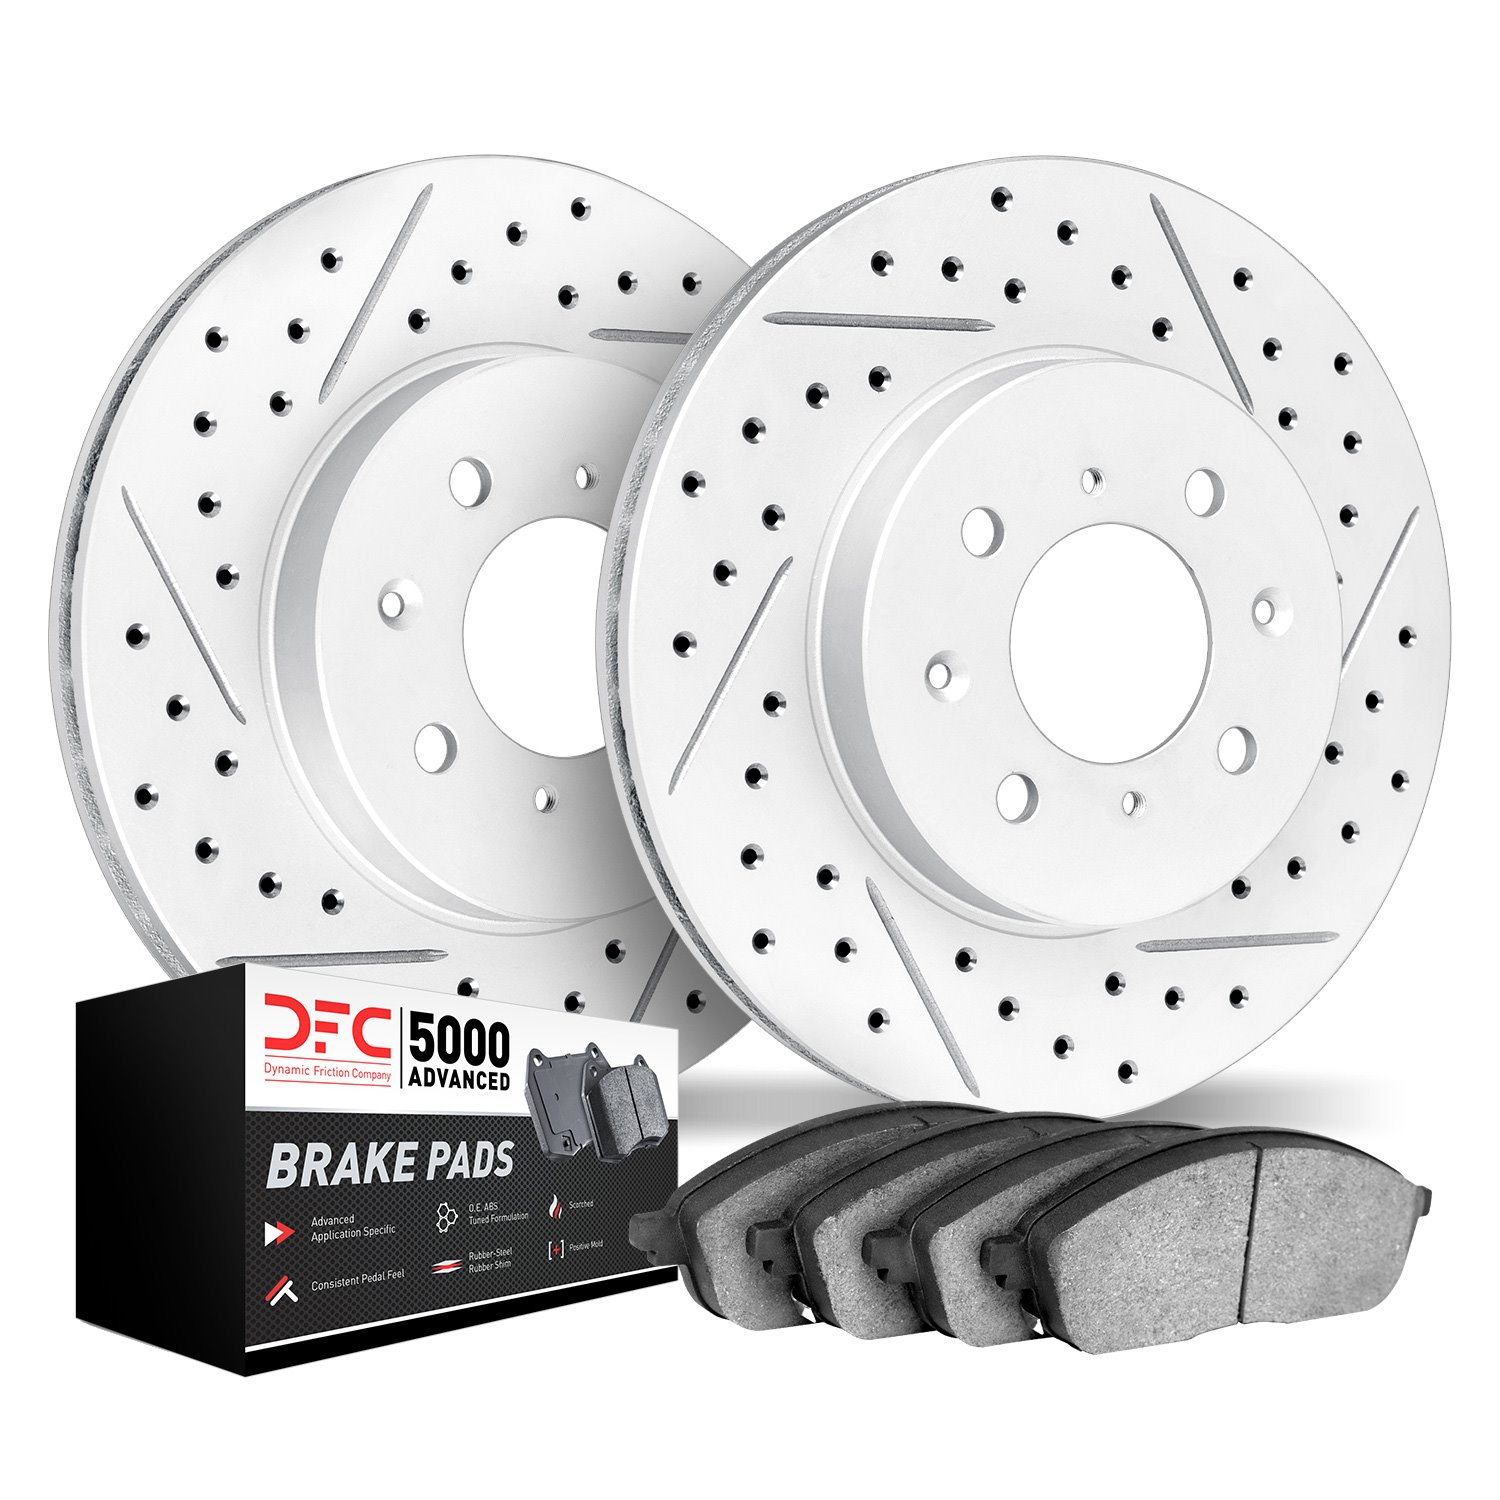 2502-27013 Geoperformance Drilled/Slotted Rotors w/5000 Advanced Brake Pads Kit, 2000-2004 Volvo, Position: Front